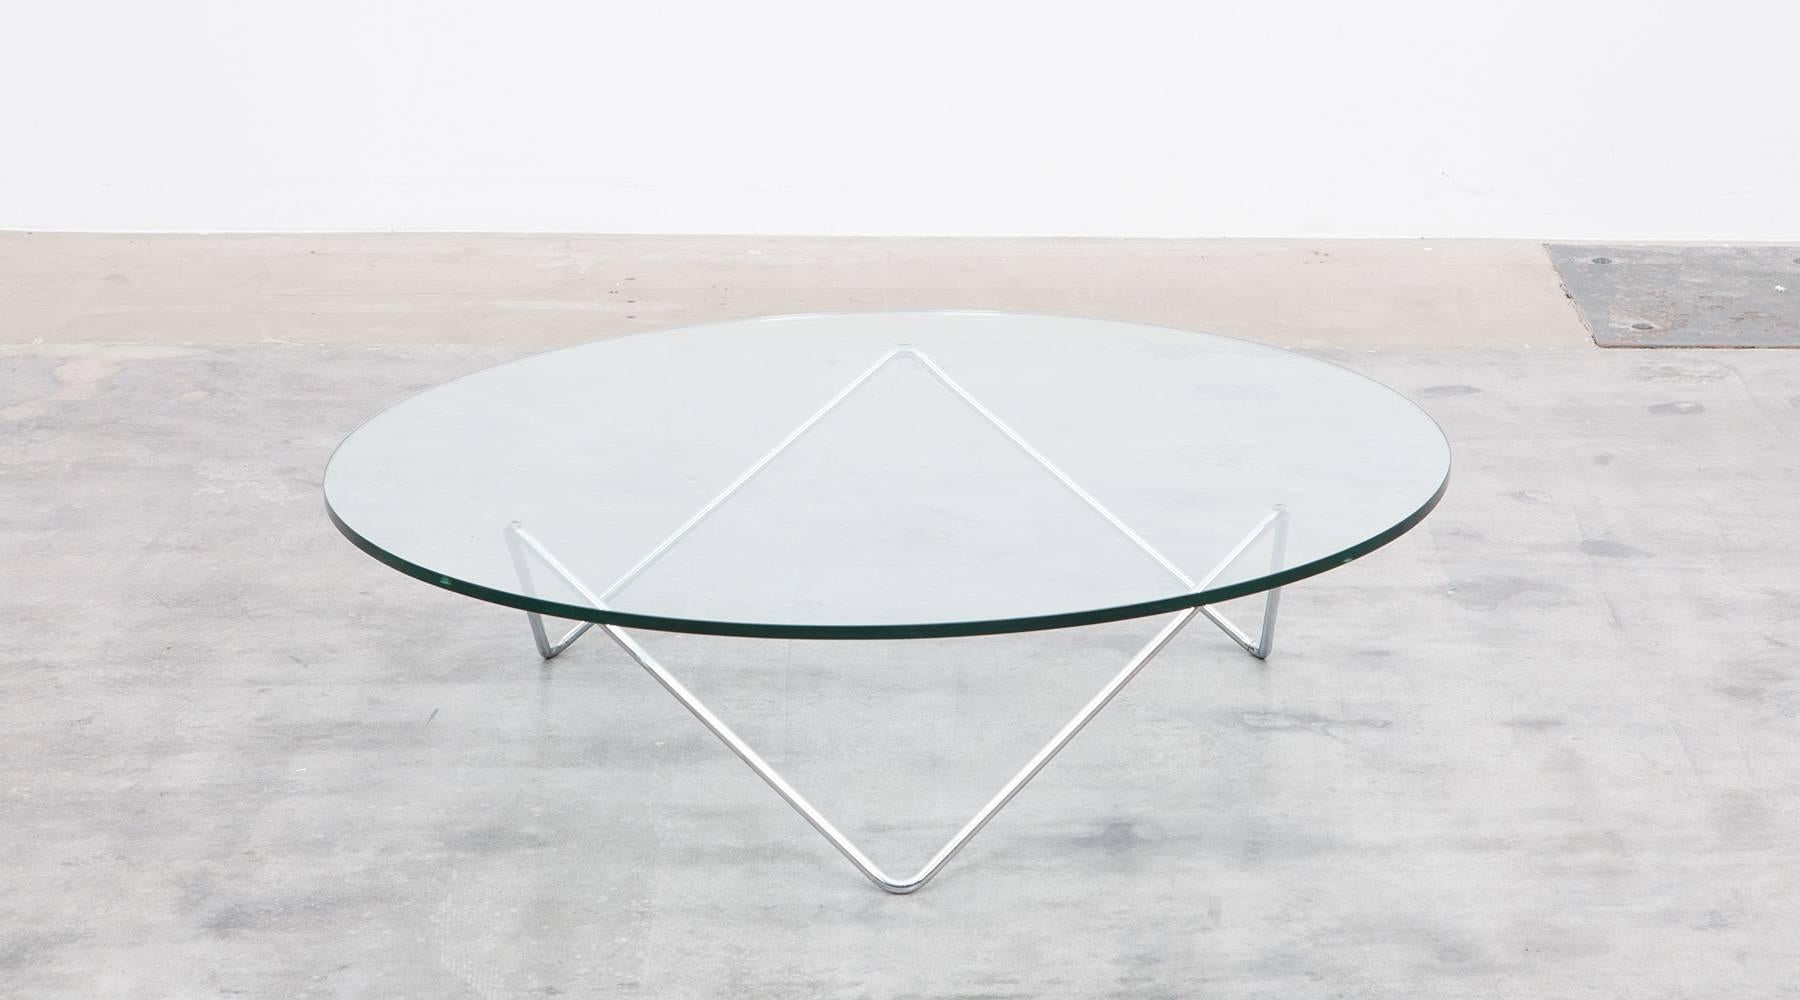 The coffee table with a round glass top on metal pipe chromium plated base is designed by German architect Herbert Hirche. The unusually wide perfectly preserved glass plate is supported by geometrically balanced metal feet. Manufactured by